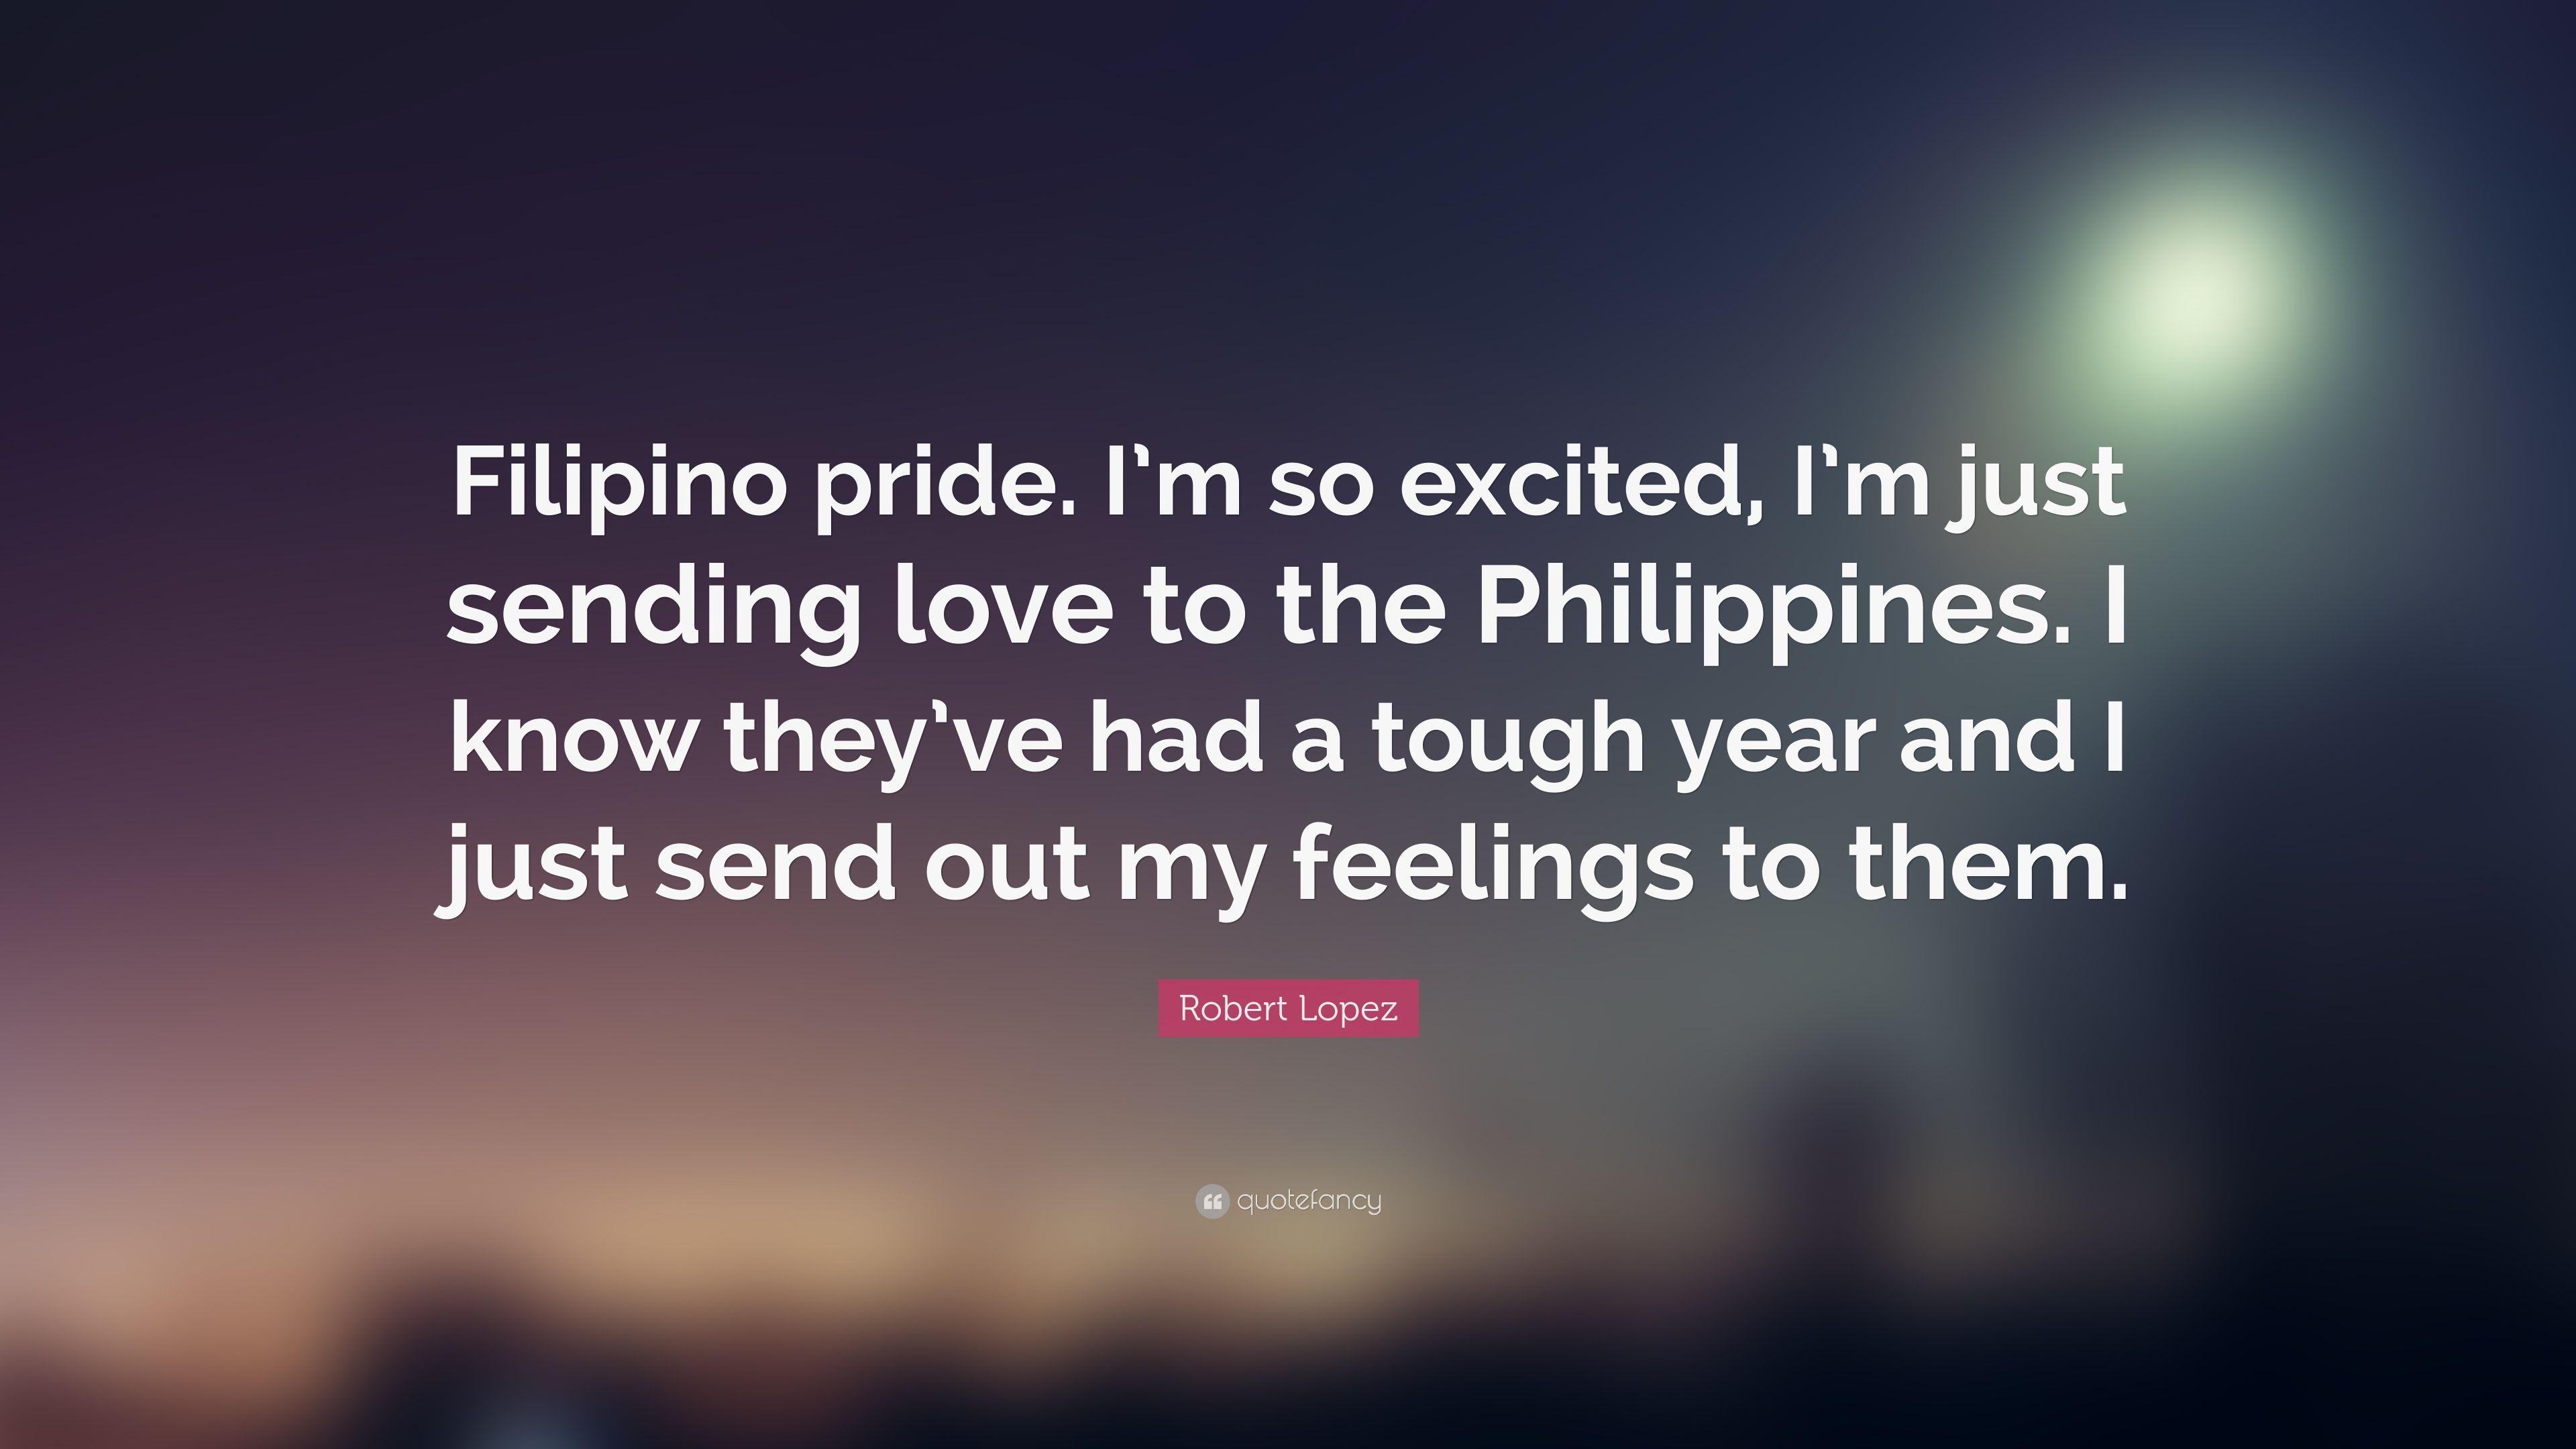 Robert Lopez Quote: “Filipino pride. I'm so excited, I'm just